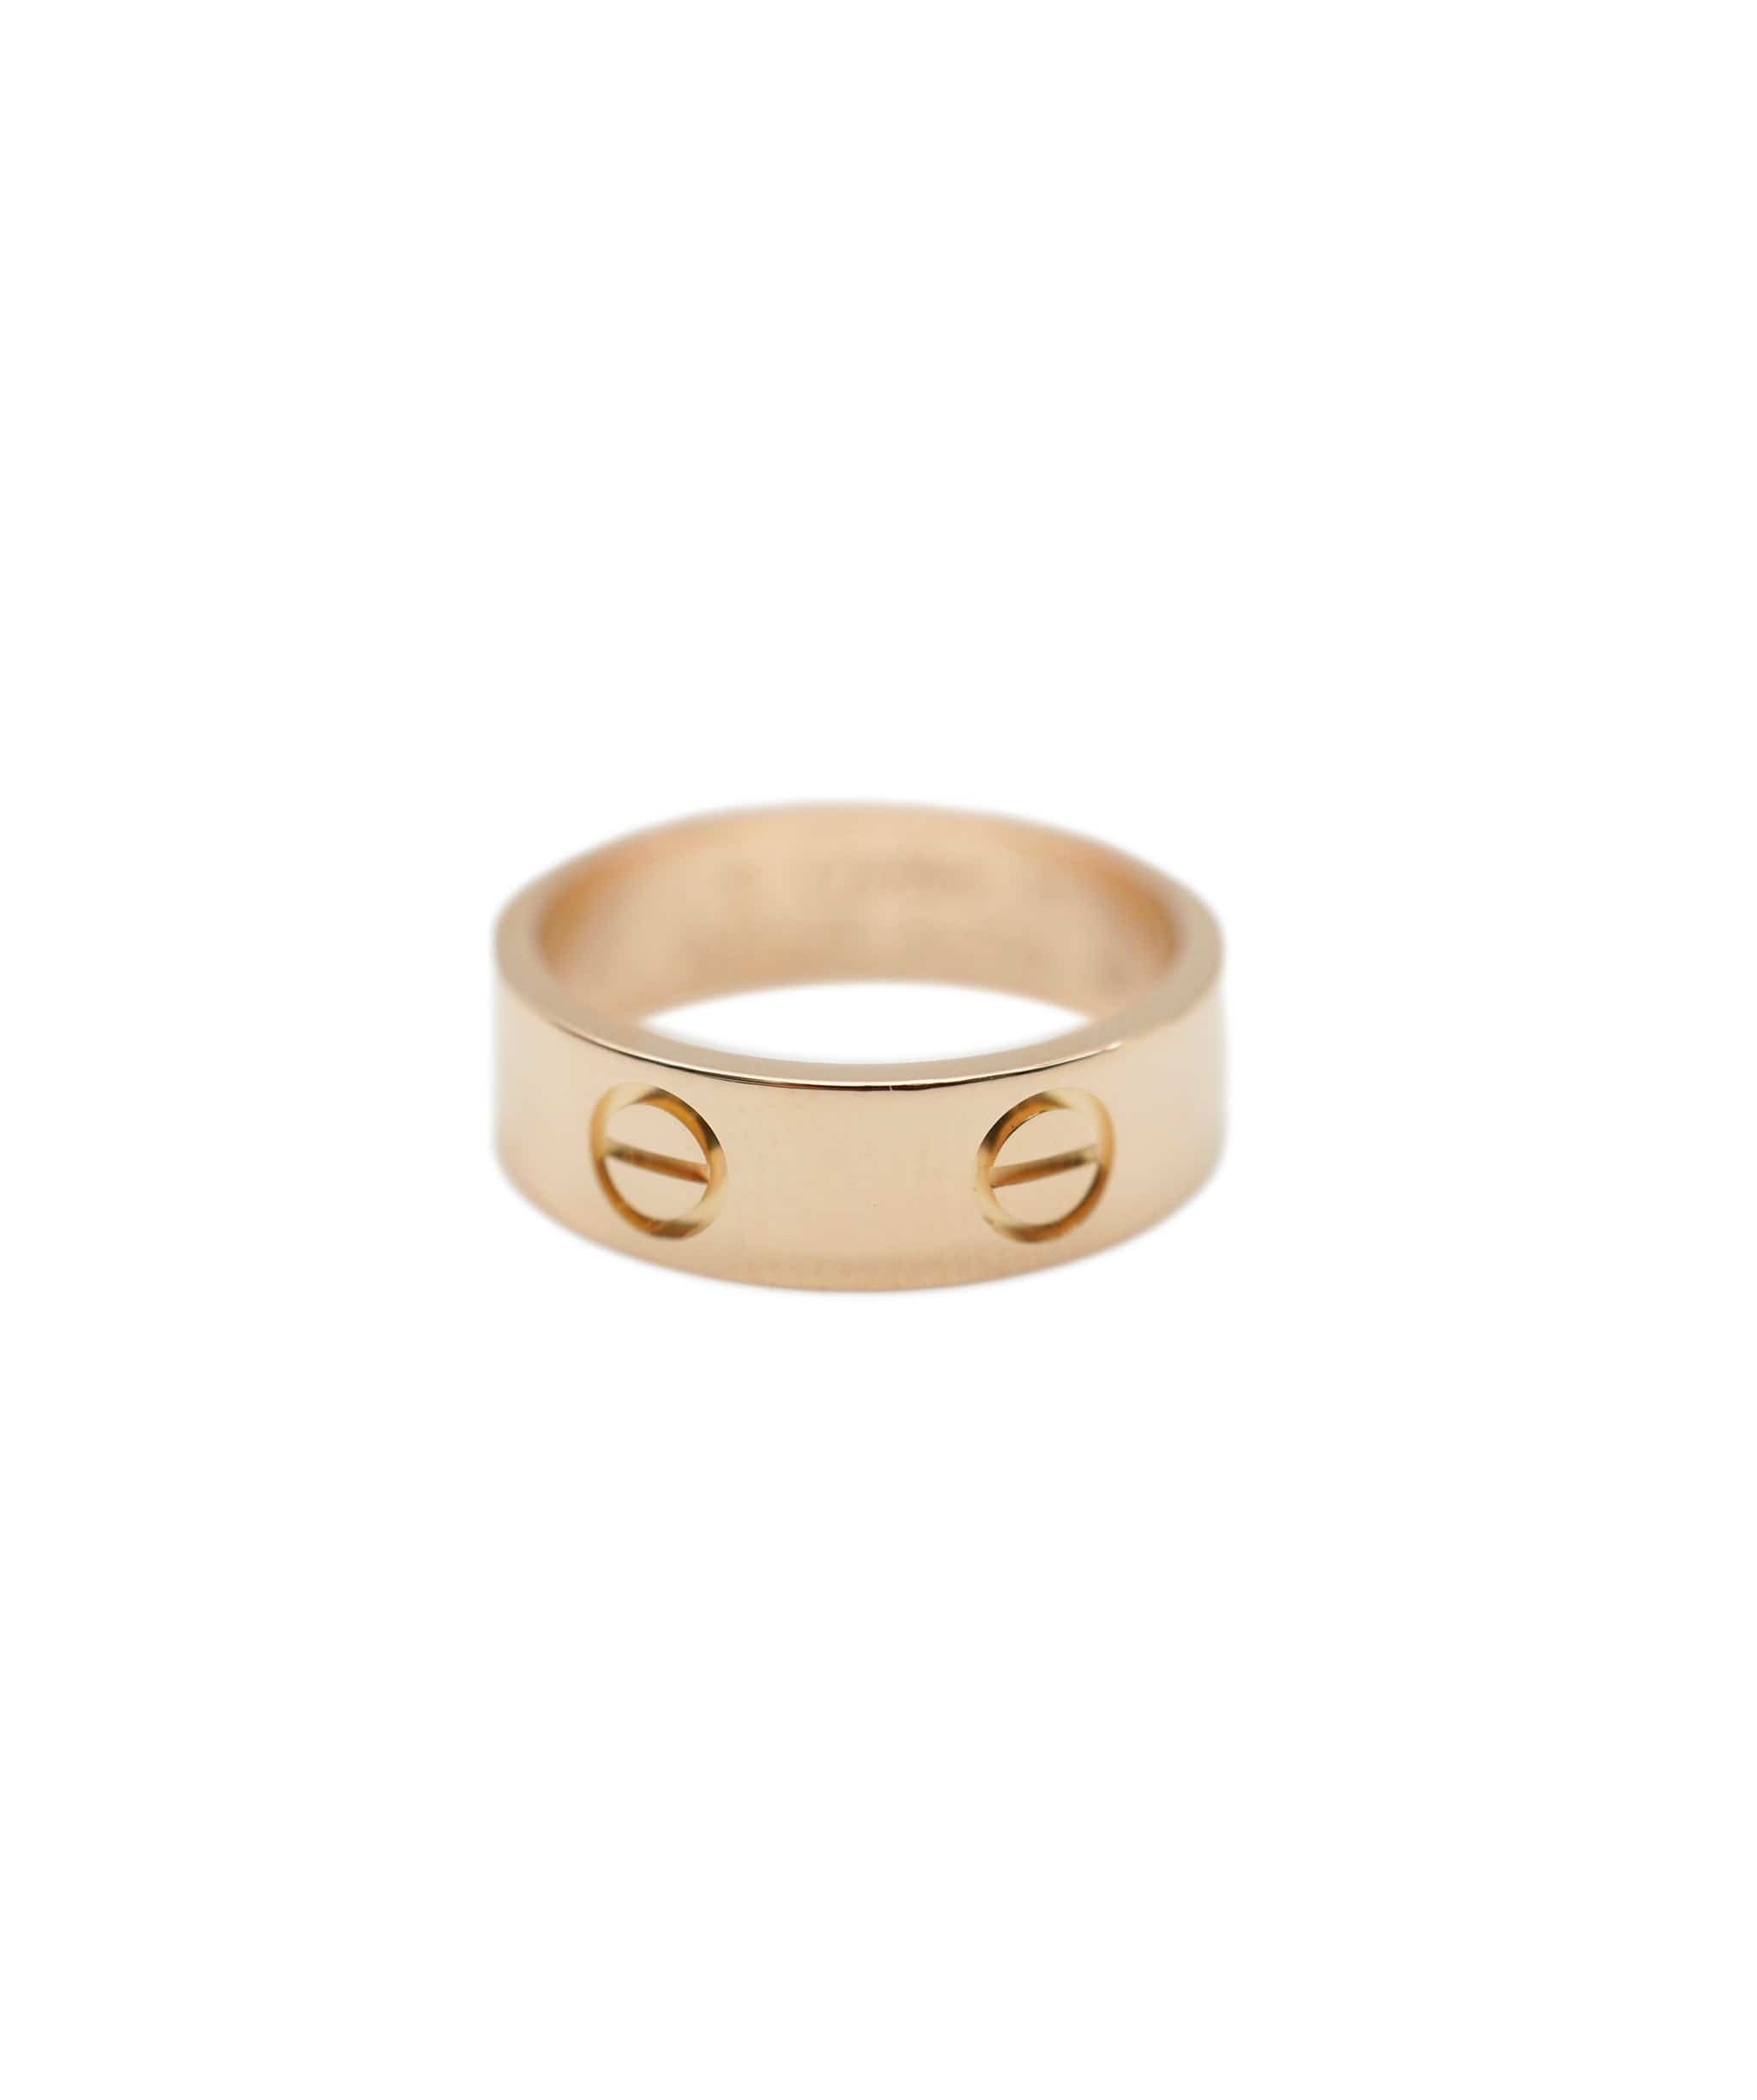 Cartier Cartier Rose Gold Love Ring, Size 51 ABC0467